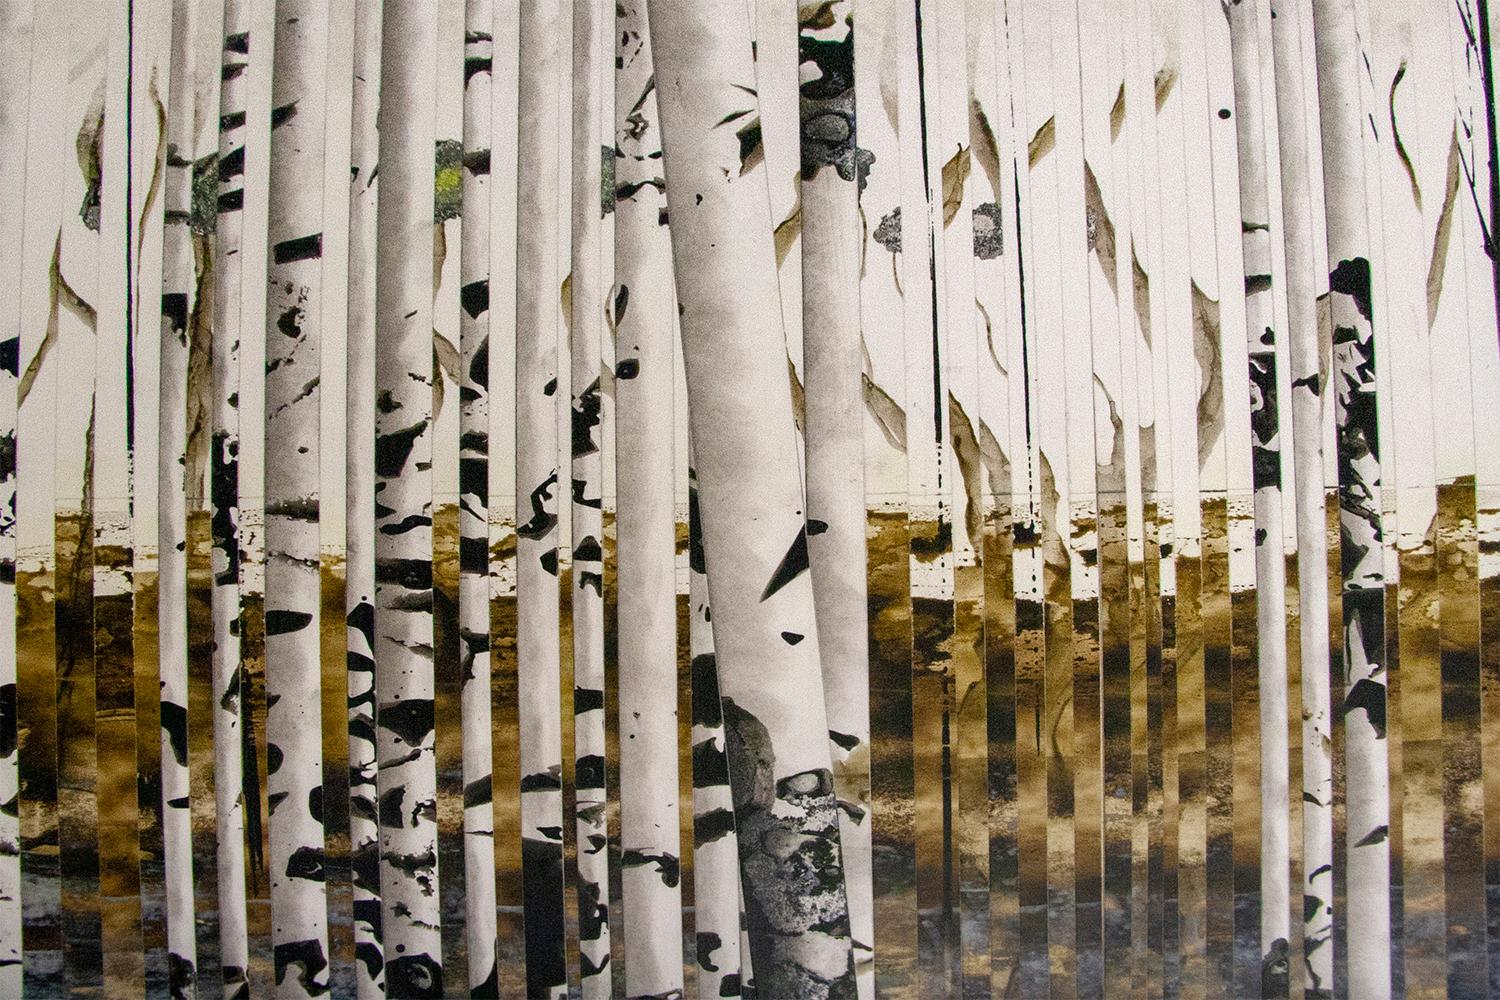 Anastasia Kimmett works with a multitude of media including but not limited to ink, pastel, gold and silver leaf. Many landscapes are created on heavy paper, then cut up, reassembled into one piece and finely detailed. The papers are fastened to a